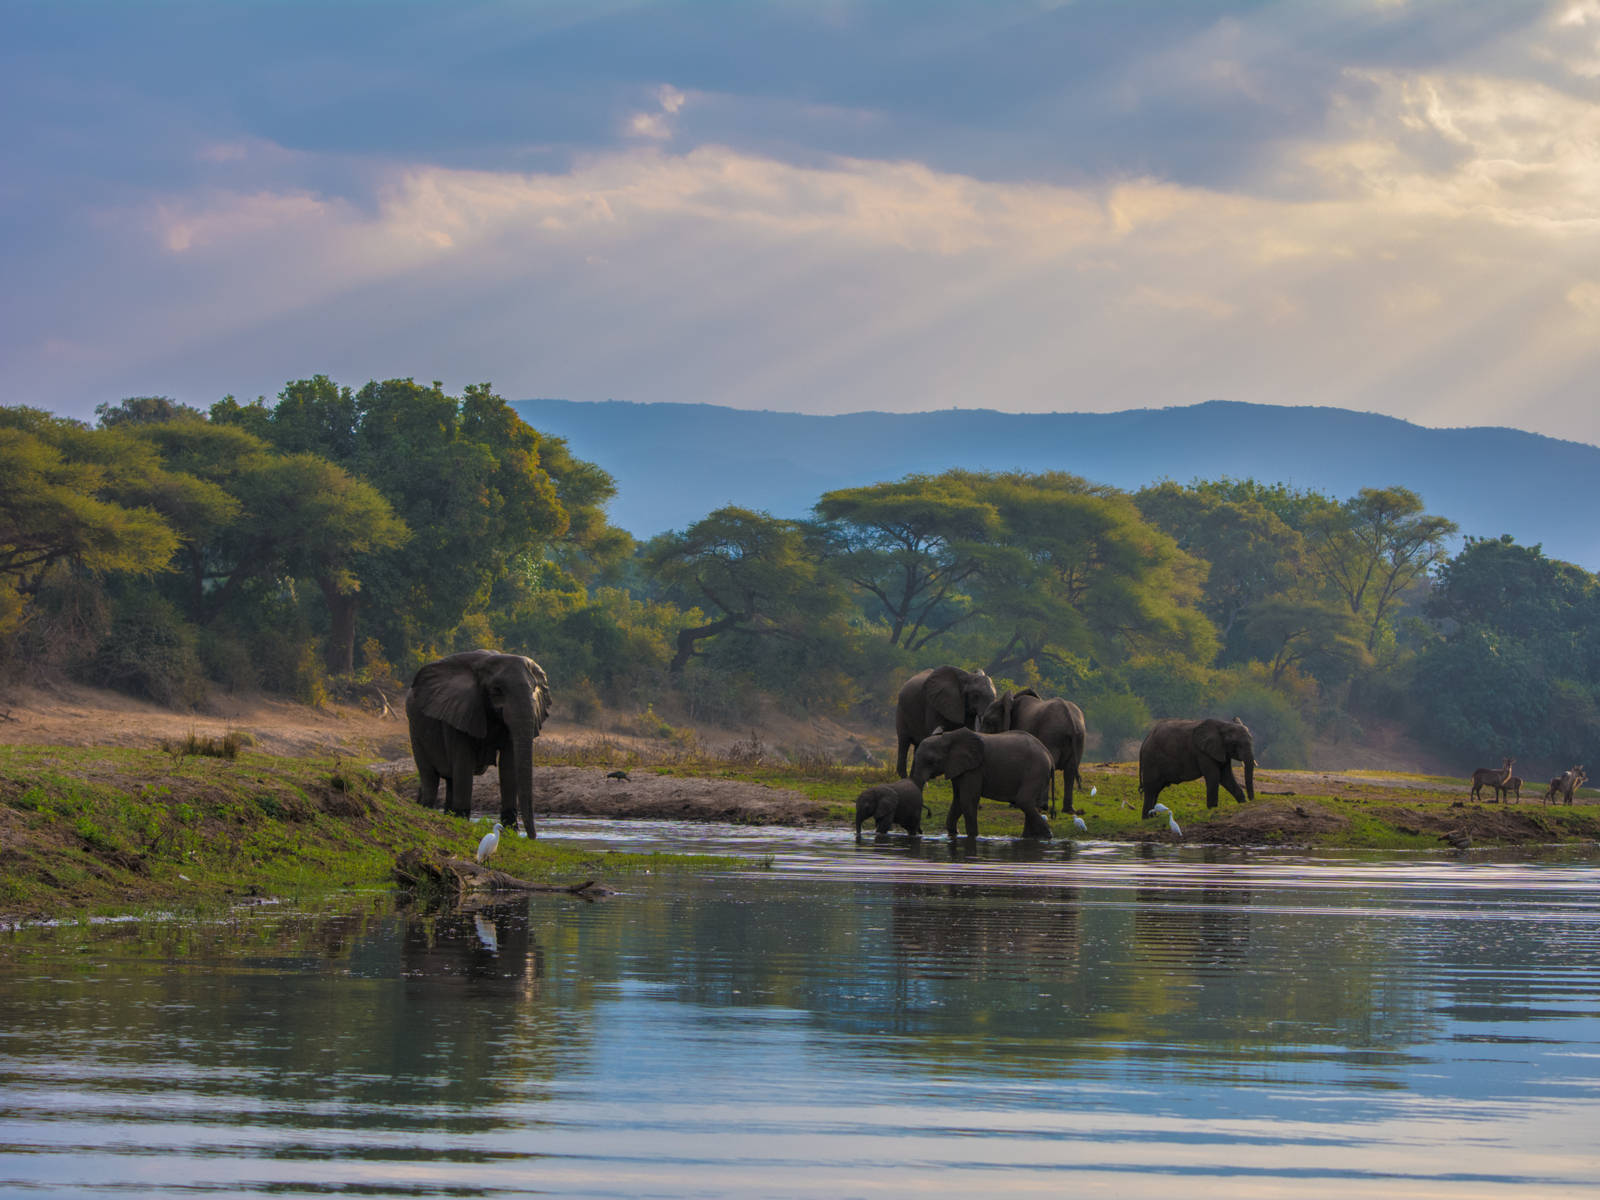 Elephant herd on the banks of a watering hole, seen from one of the best safaris in Africa, the Lower Zambezi National Park